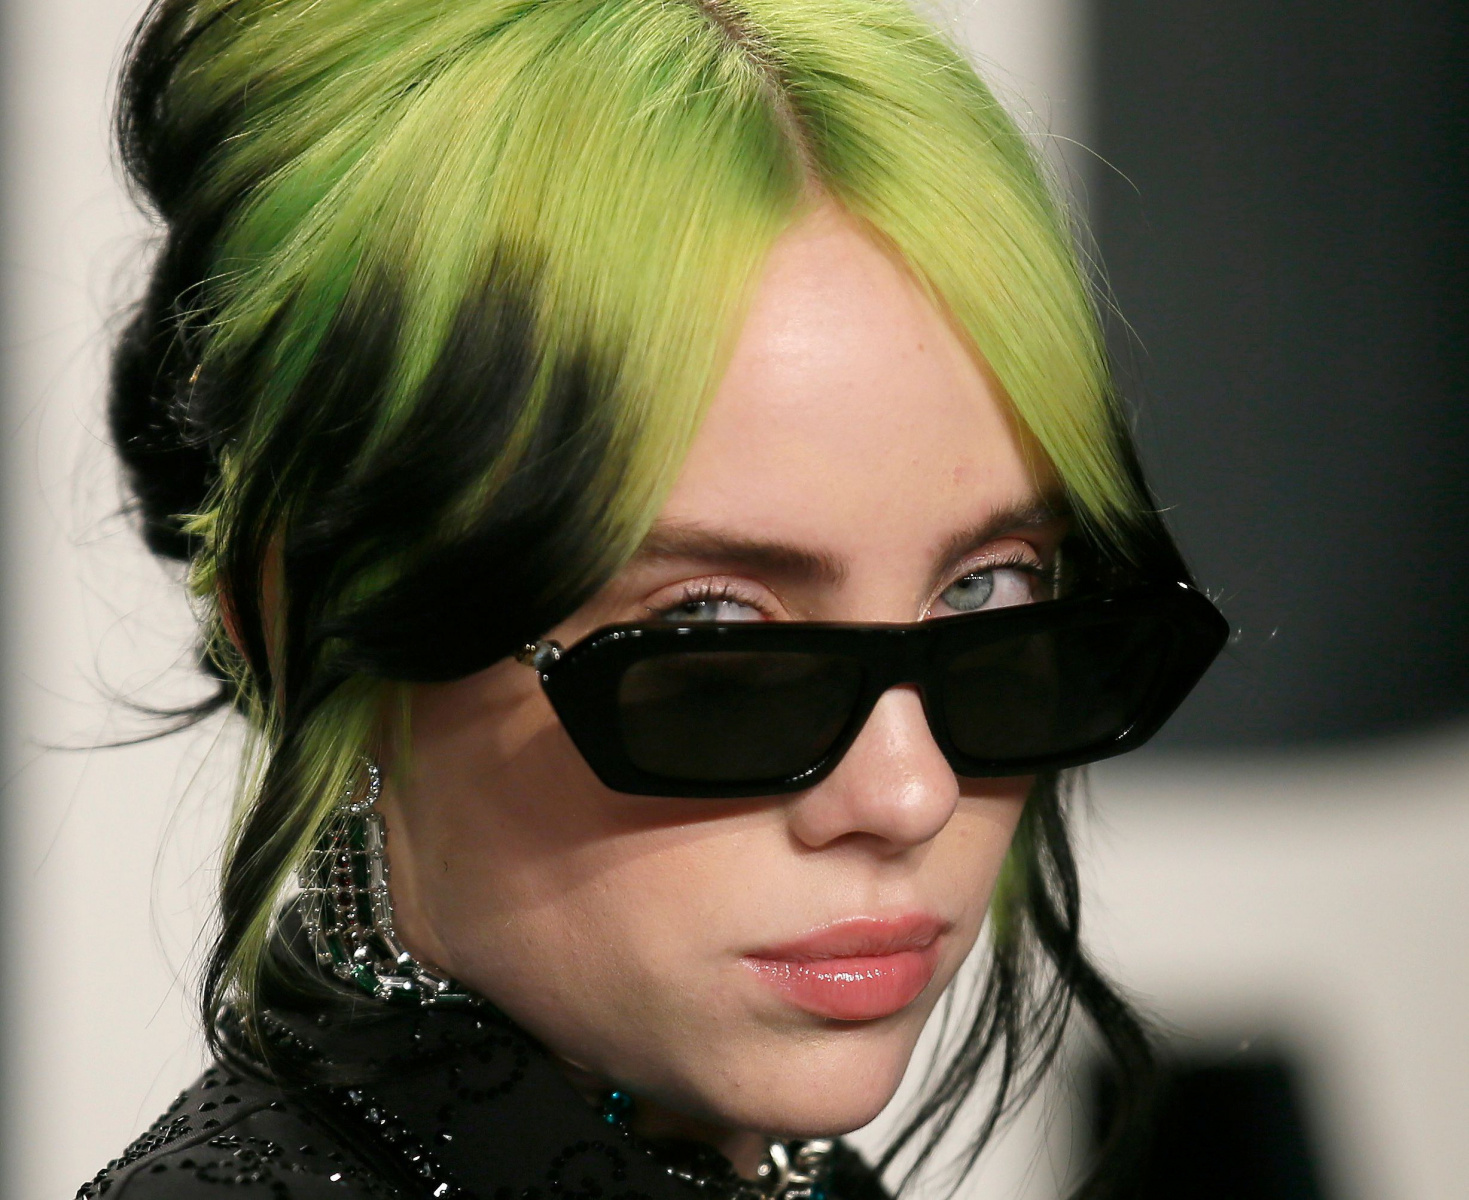 Billie Eilish's Blonde Hair Is the Most Surprising Thing You'll See Today - wide 2